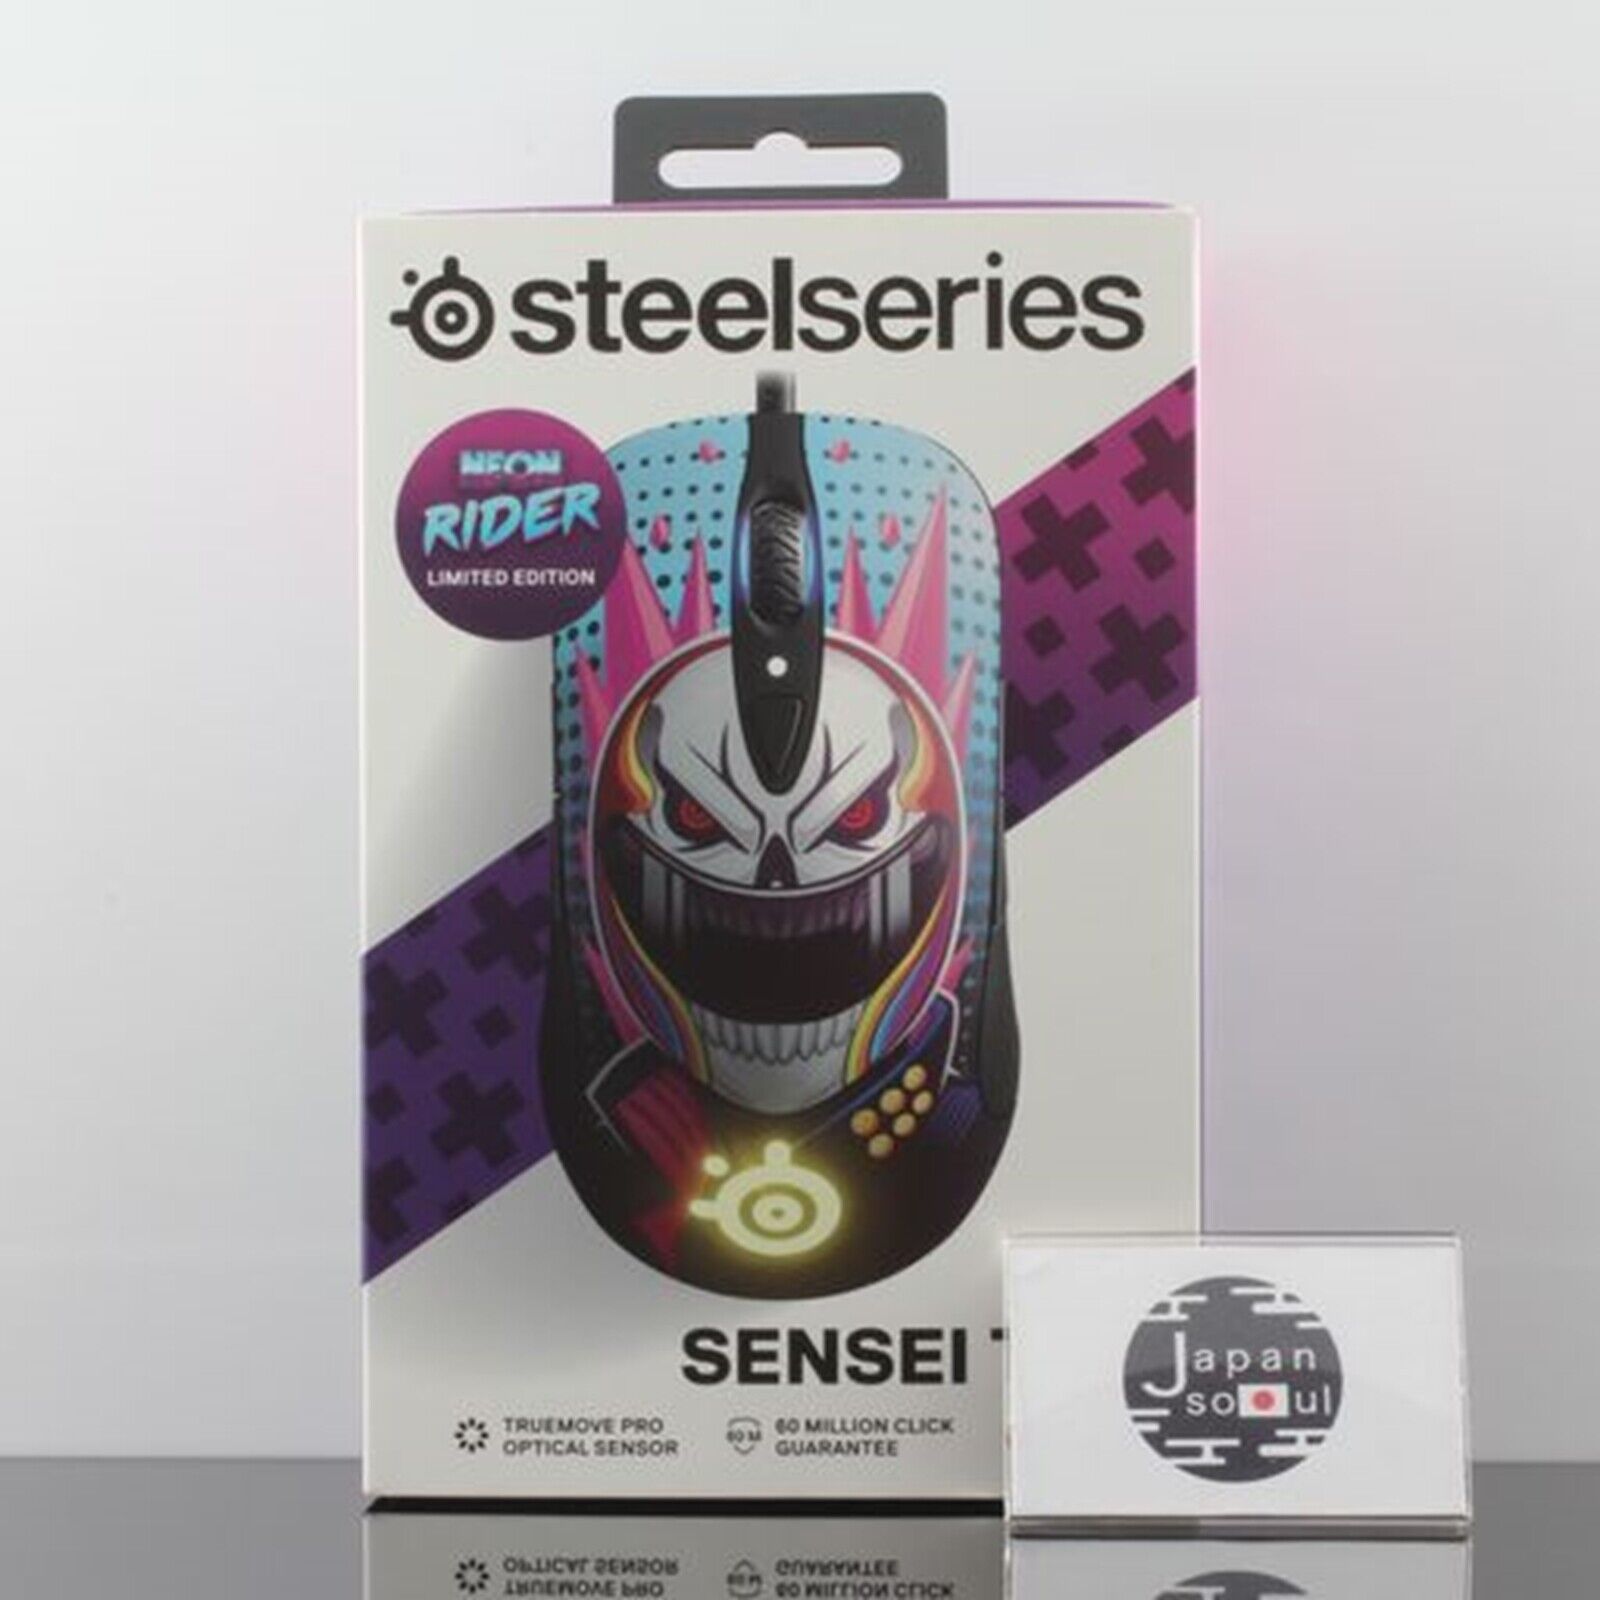 Steelseries SENSEI NEON RIDER LIMITED EDITION USB Wired Gaming Mouse From JAPAN